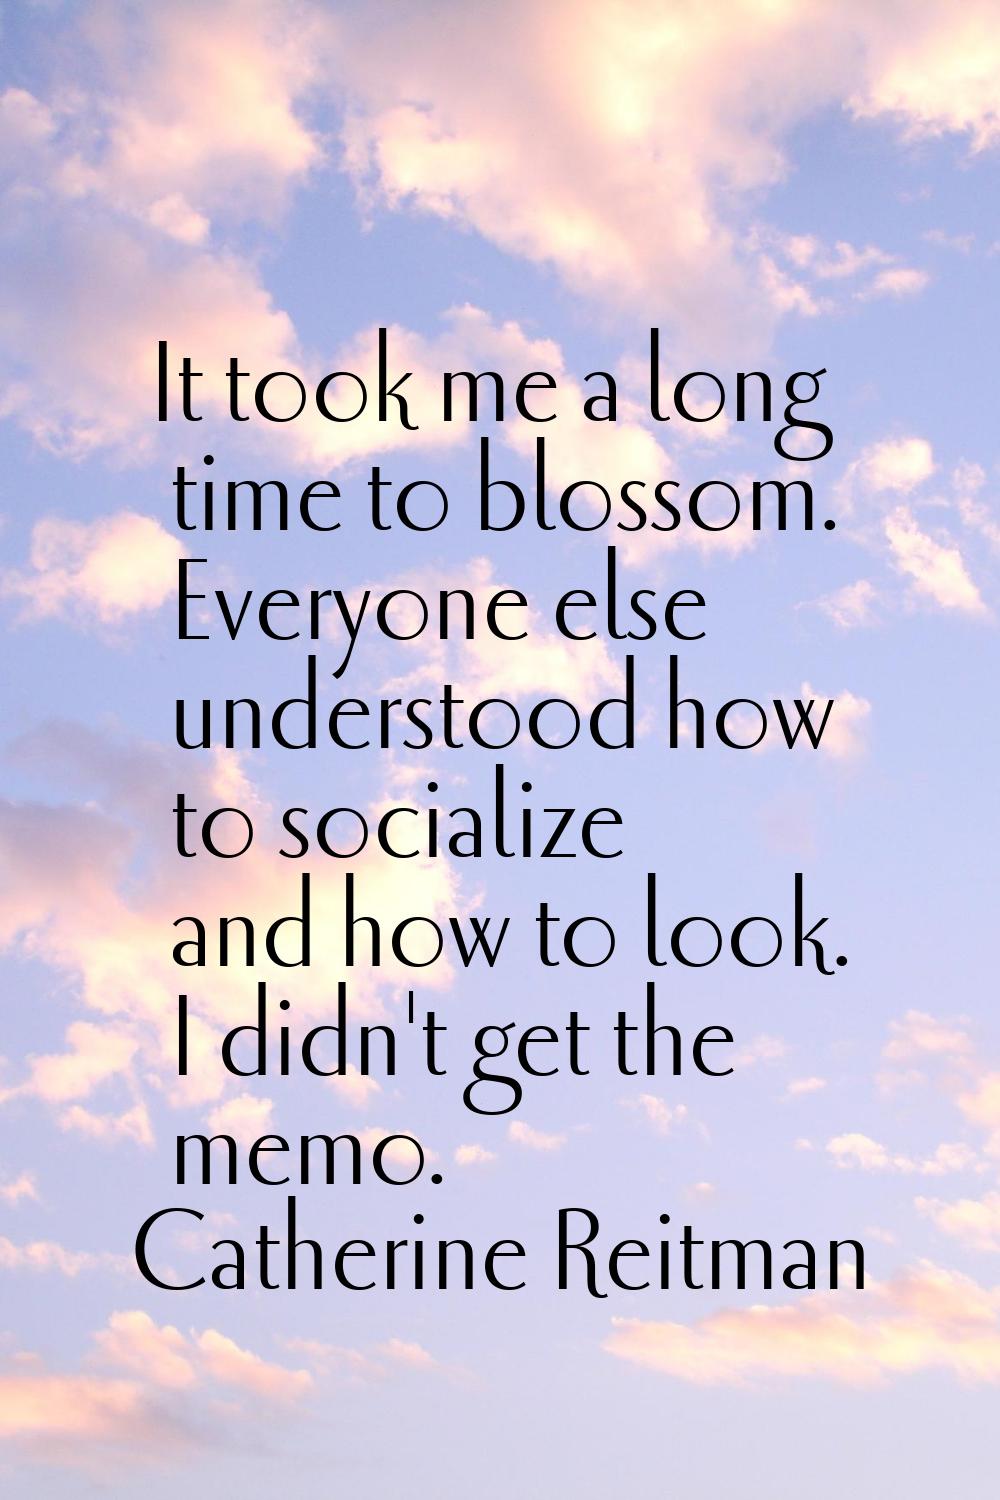 It took me a long time to blossom. Everyone else understood how to socialize and how to look. I did